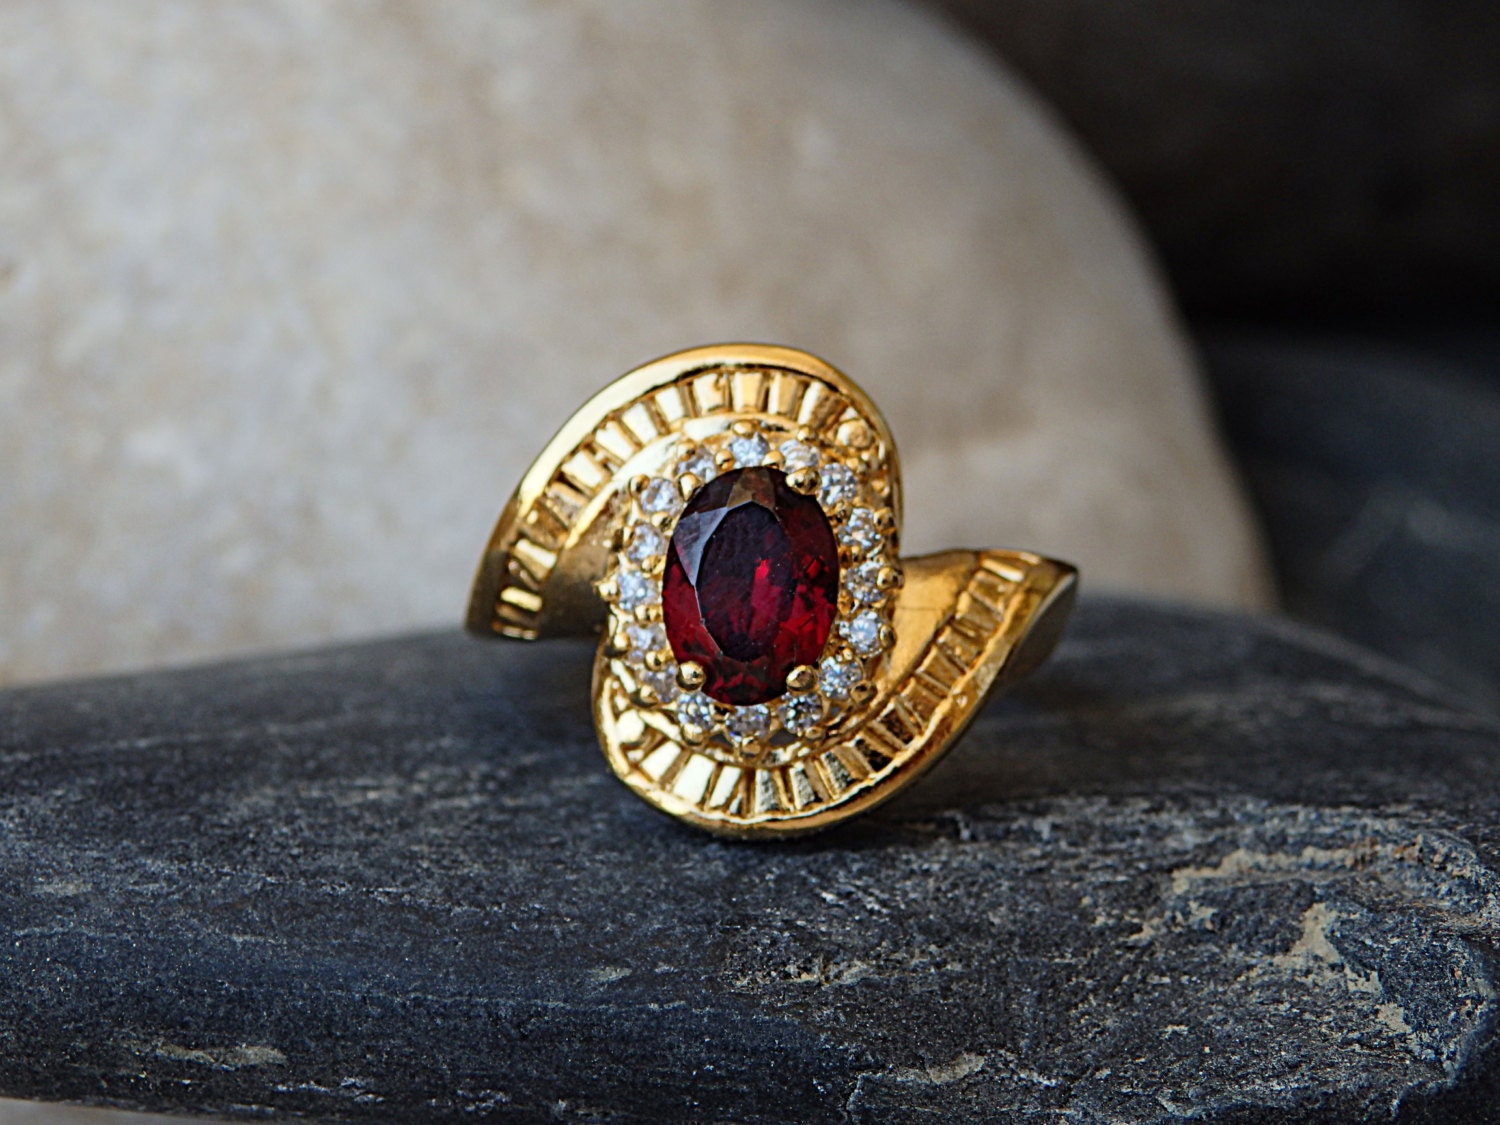 Beautiful Pin Garnet Colored Ring Upon Ring Upon Ring Multiple Ring Brooch Dark Red Alive with Color and Shine Brooch Brooch